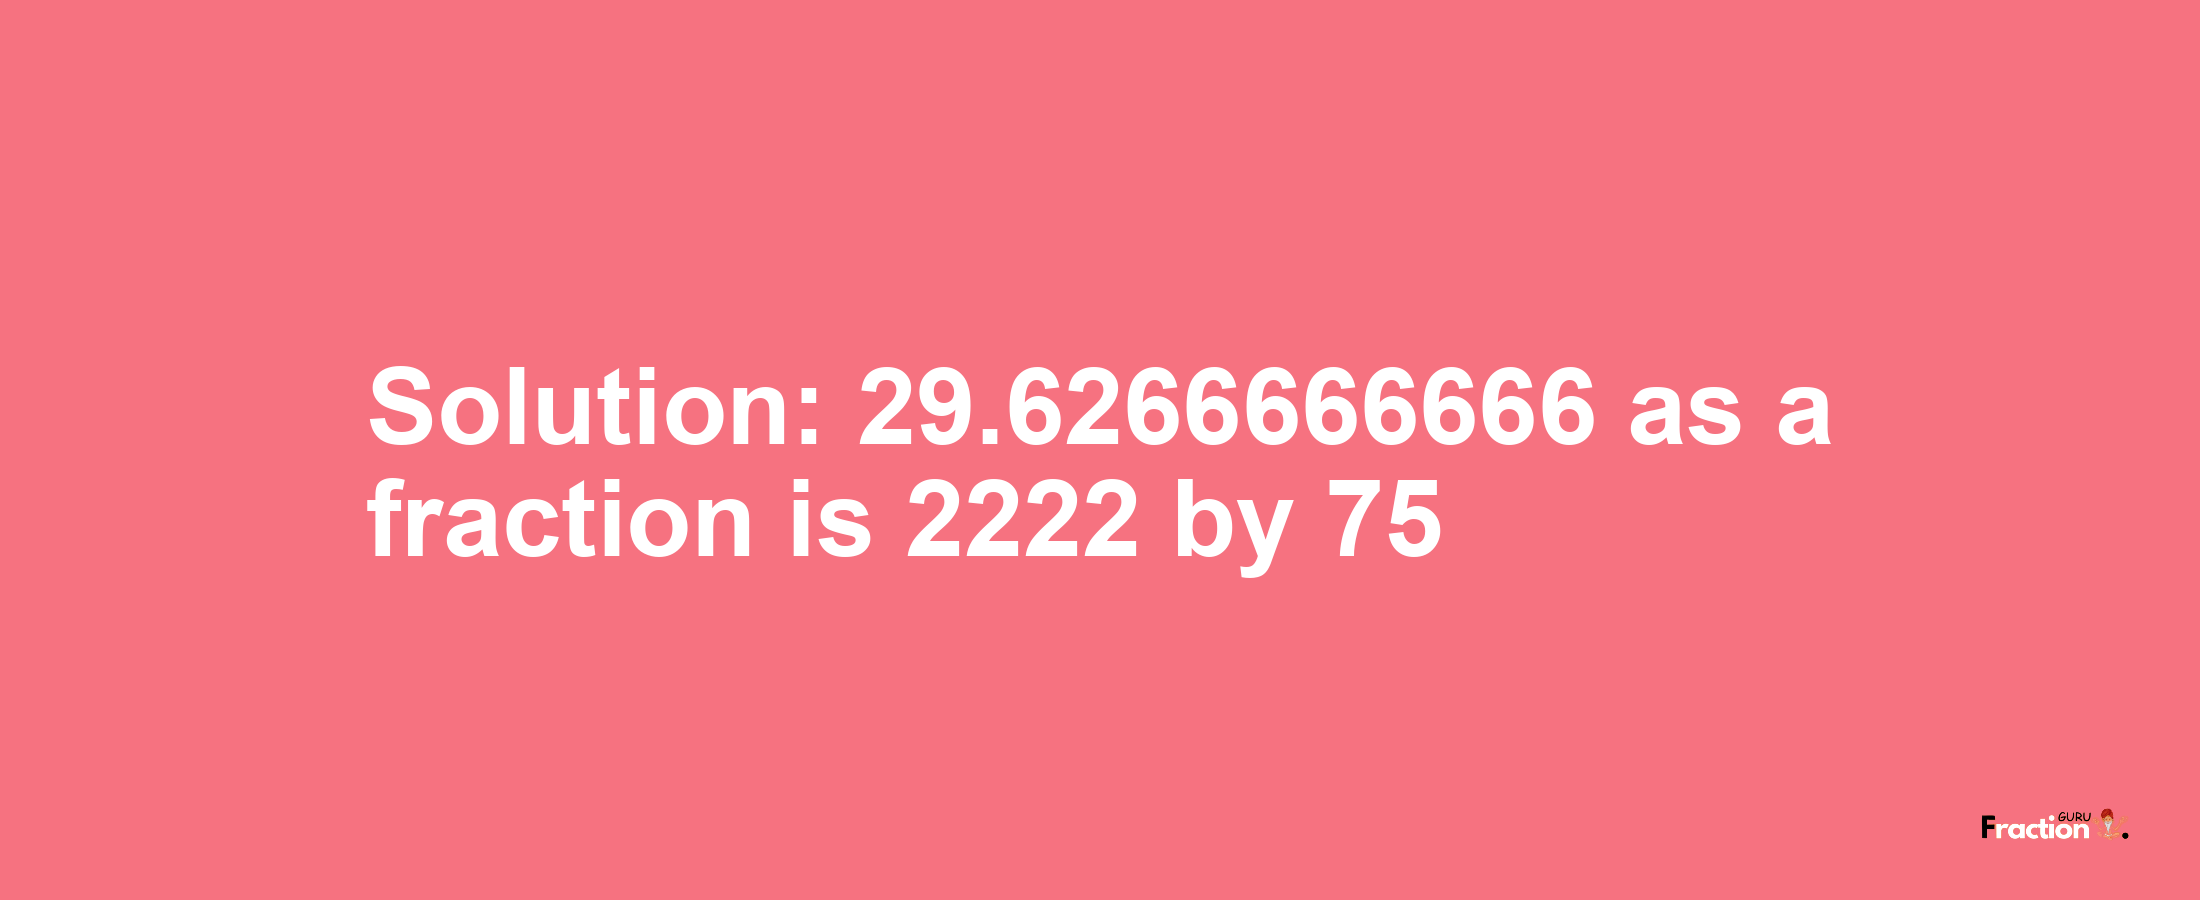 Solution:29.6266666666 as a fraction is 2222/75